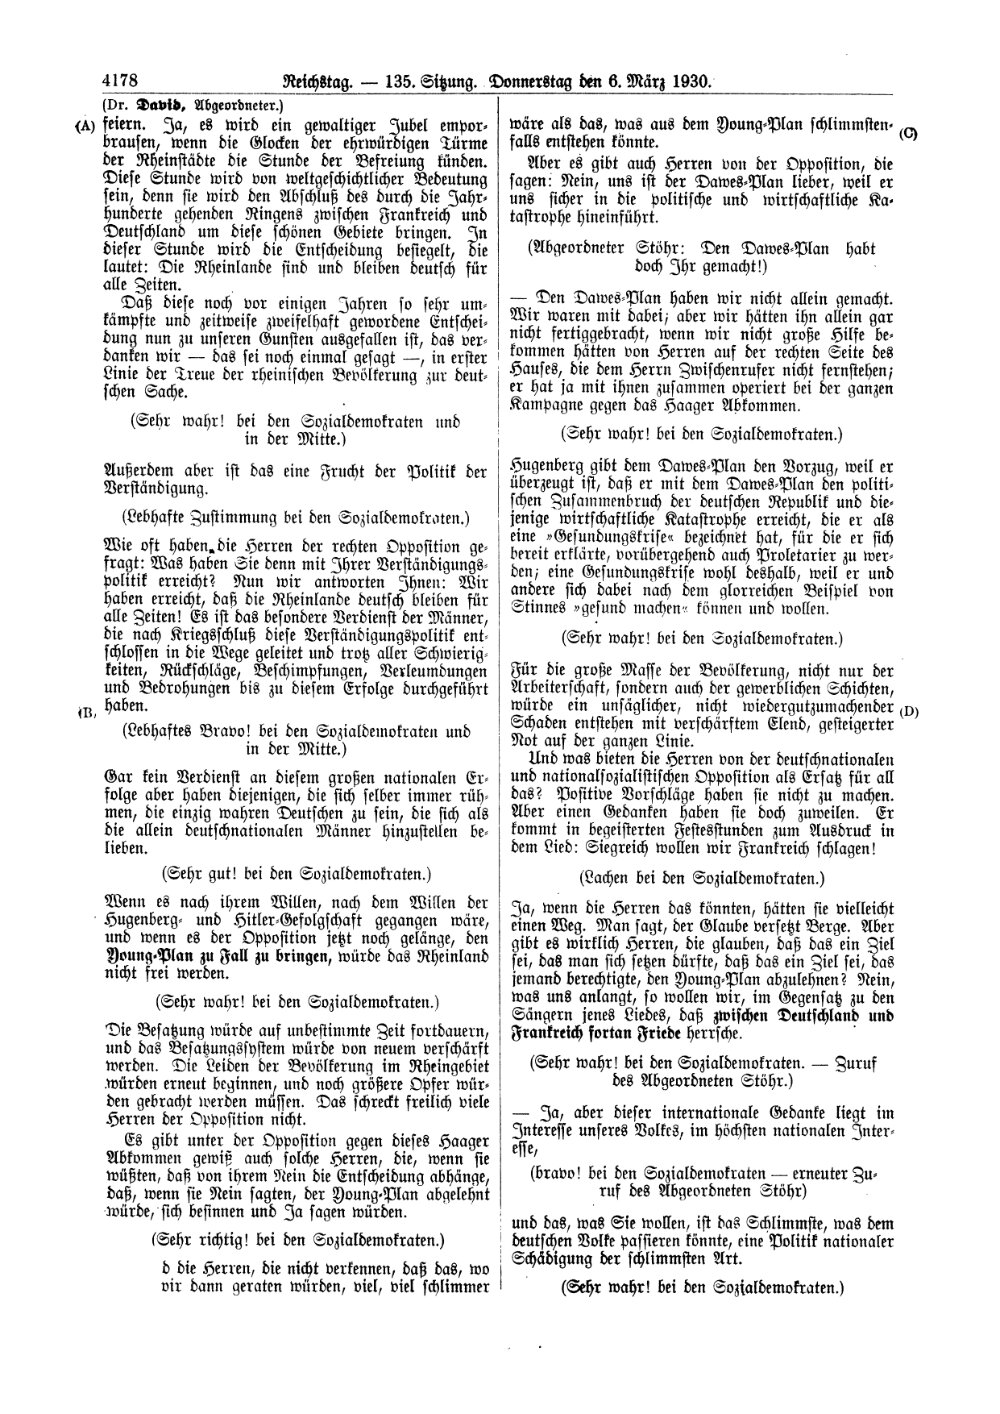 Scan of page 4178